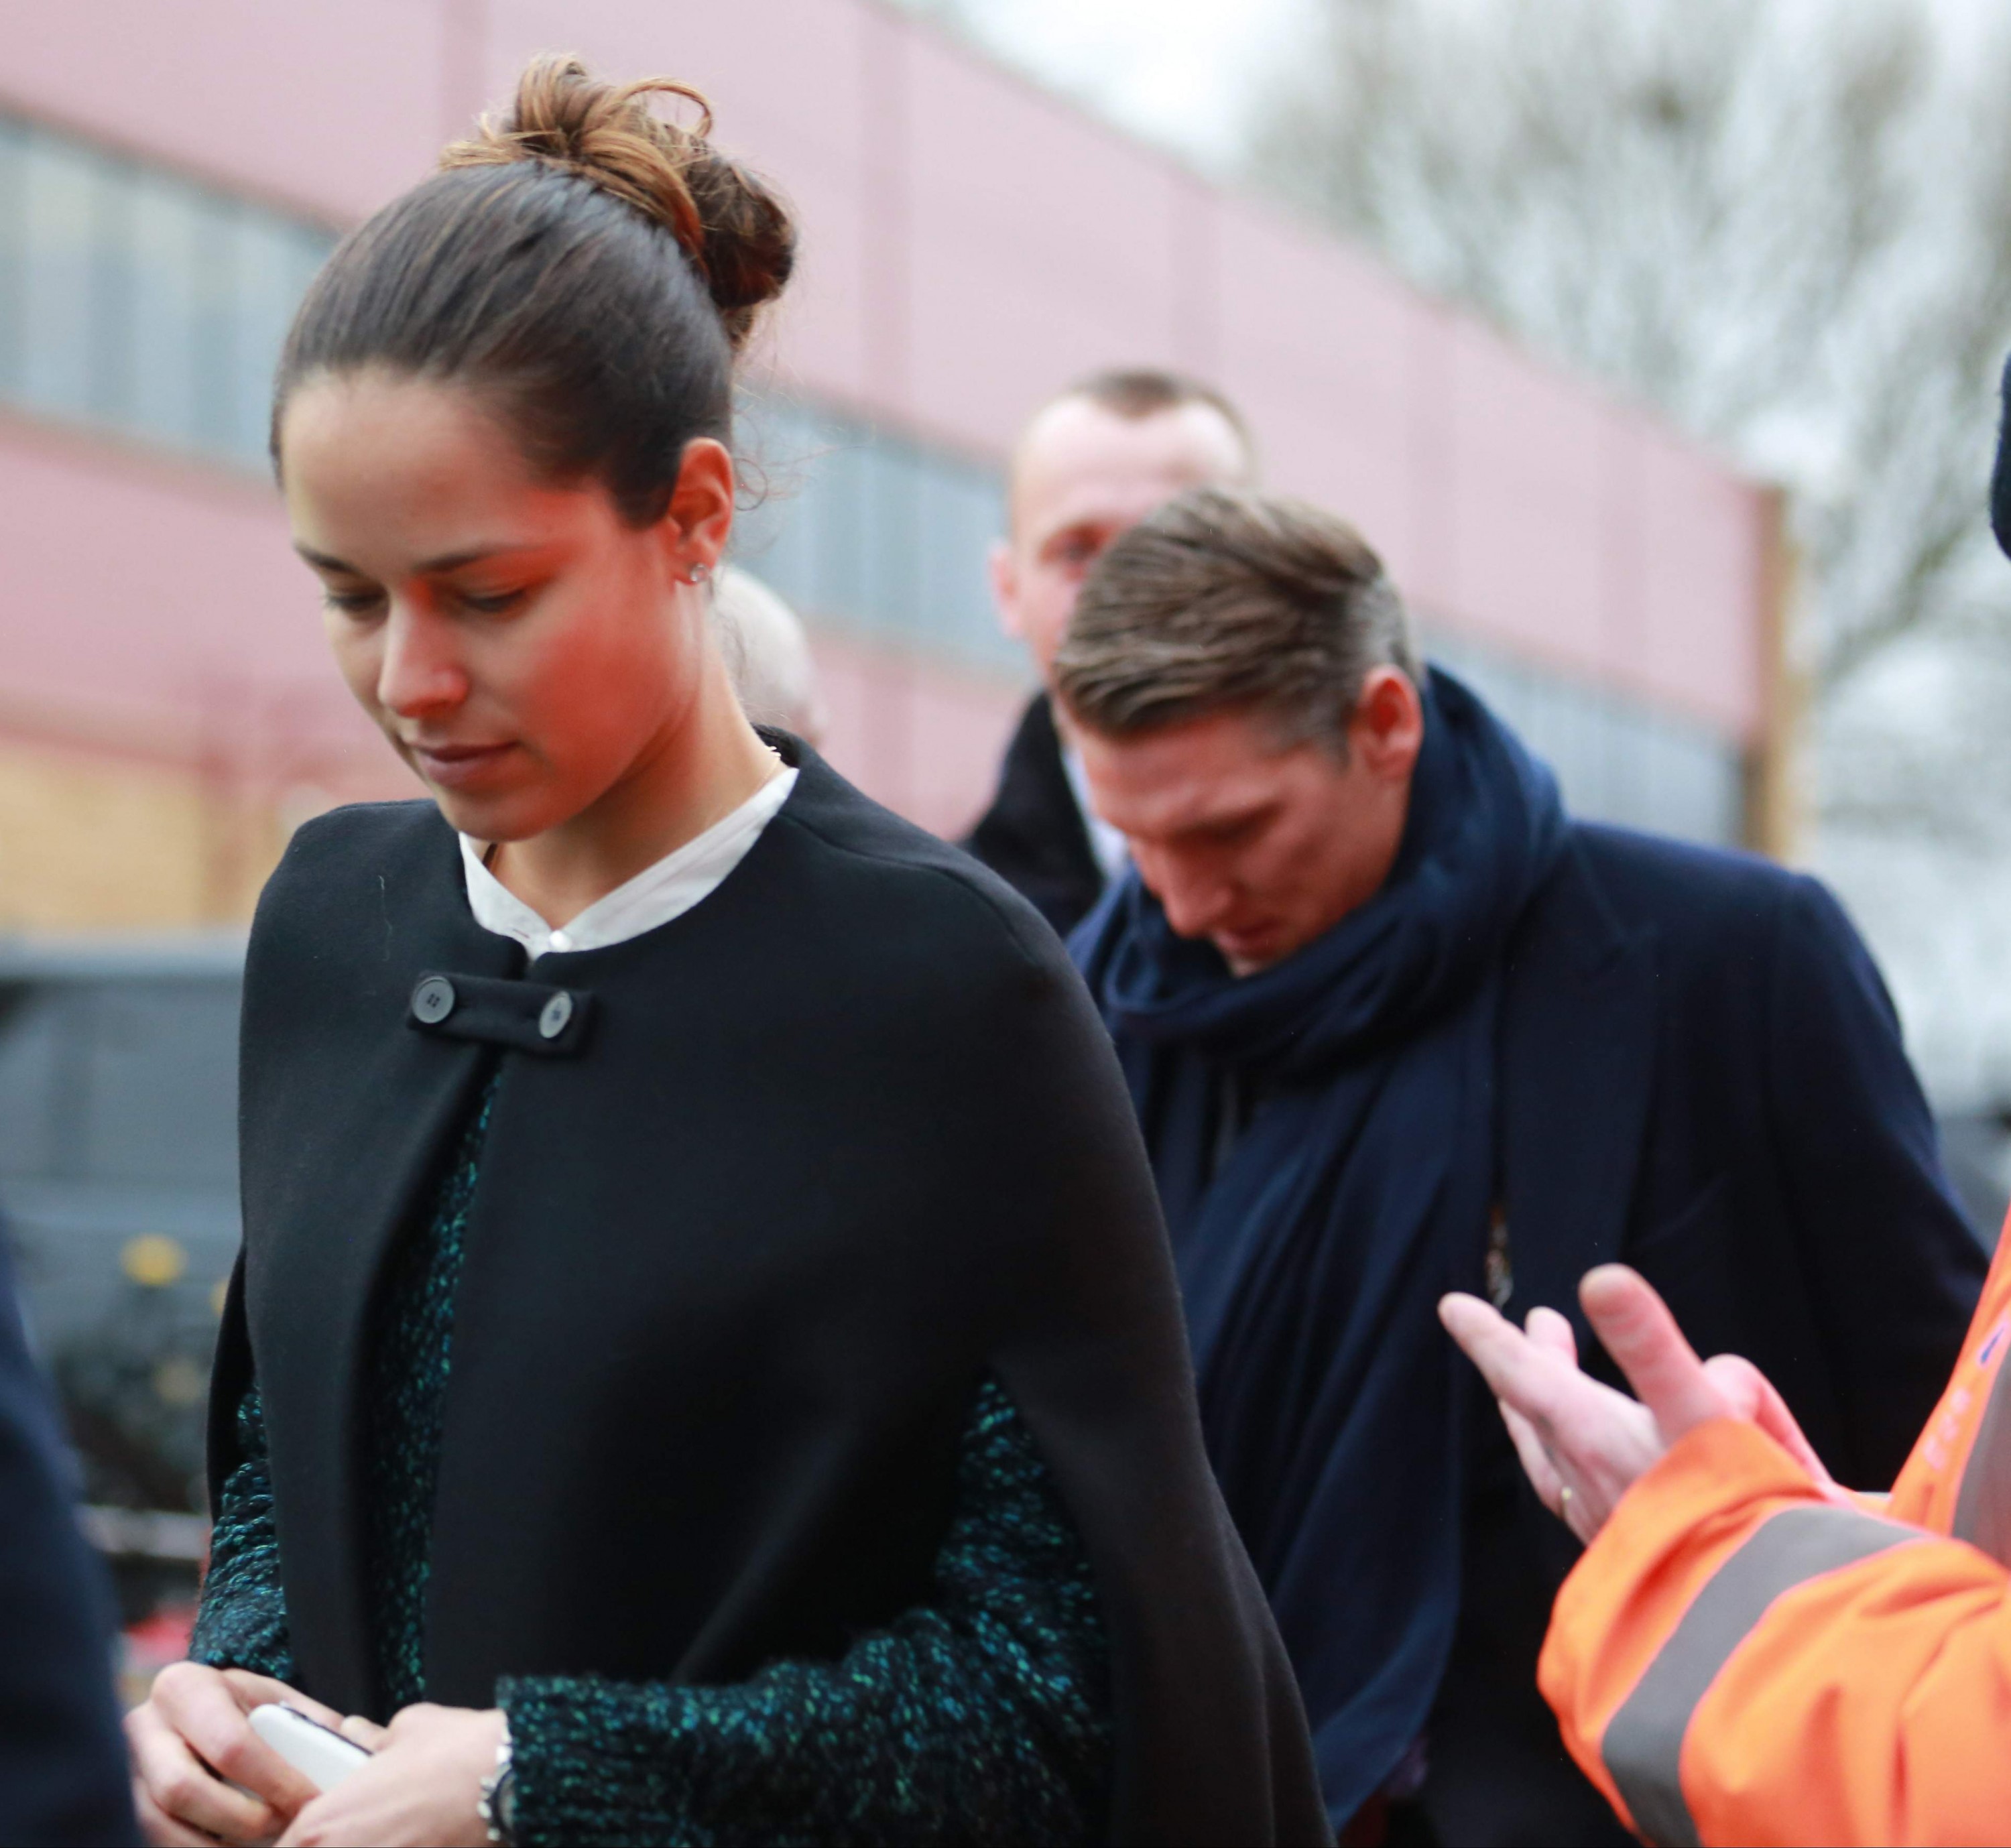 Ana Ivanovic and Bastian Schweinsteiger - Seen at Old Trafford in Manchester